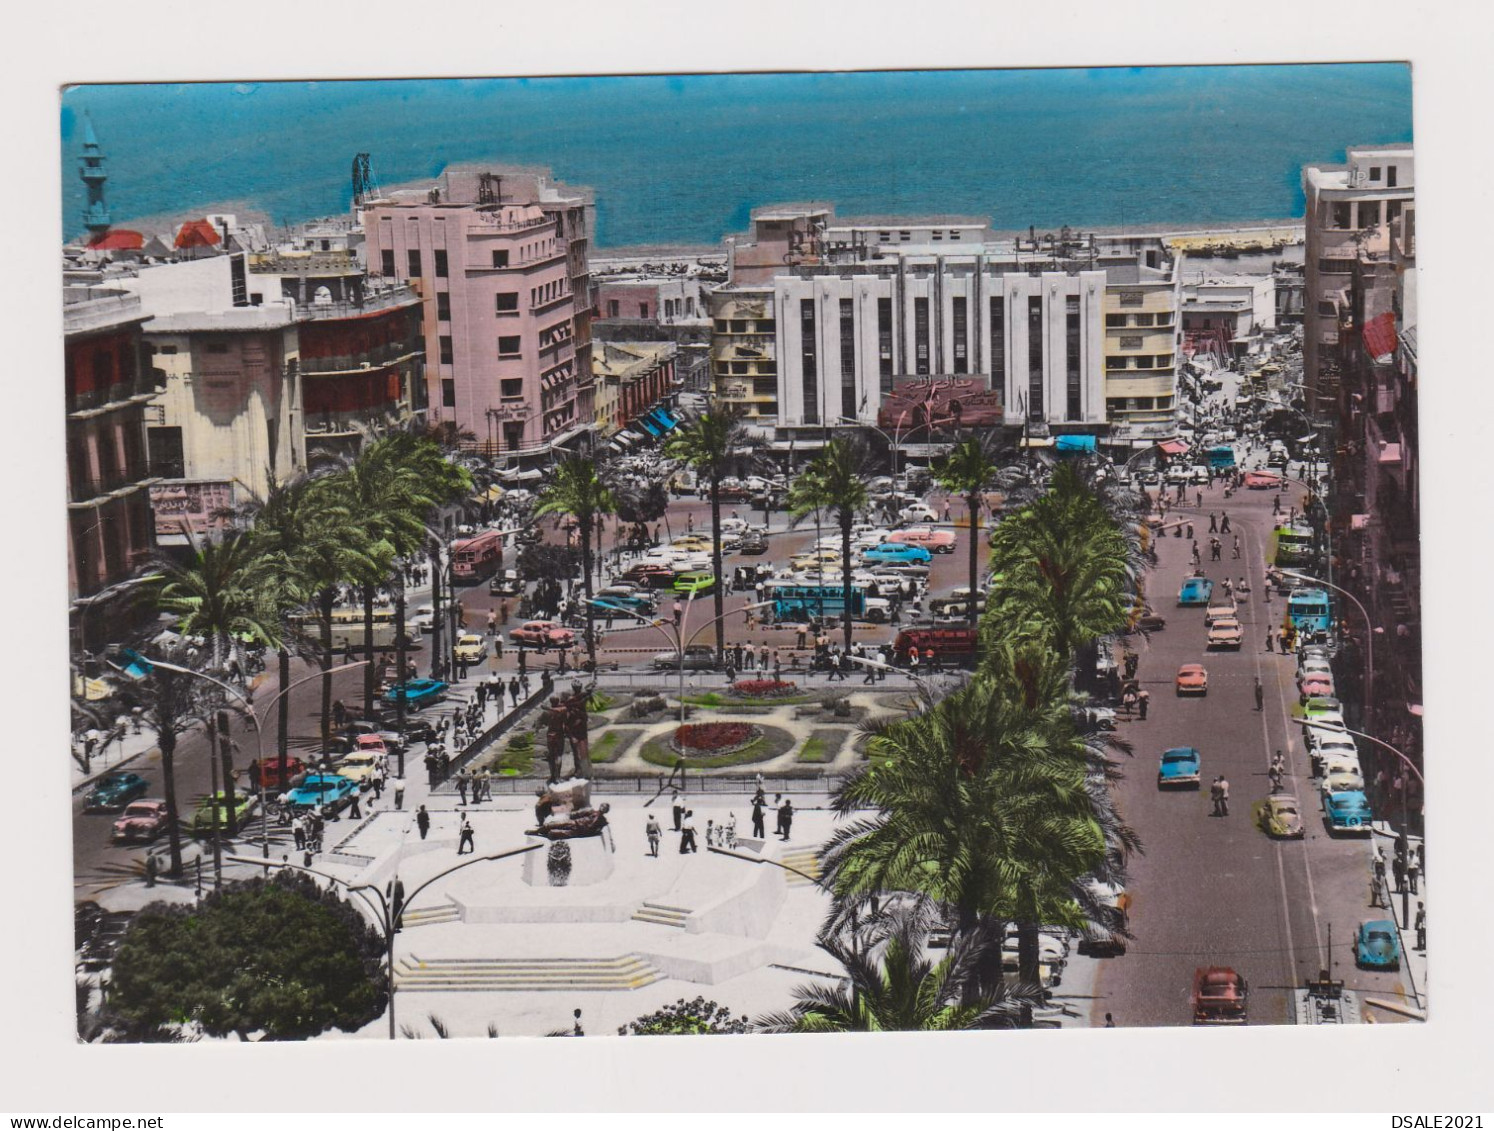 Lebanon Liban BEIRUT MARTYR'S Square, Many Old Car, Vintage Photo Postcard W/Topic Stamp Sent Airmail To Bulgaria /1304 - Libanon